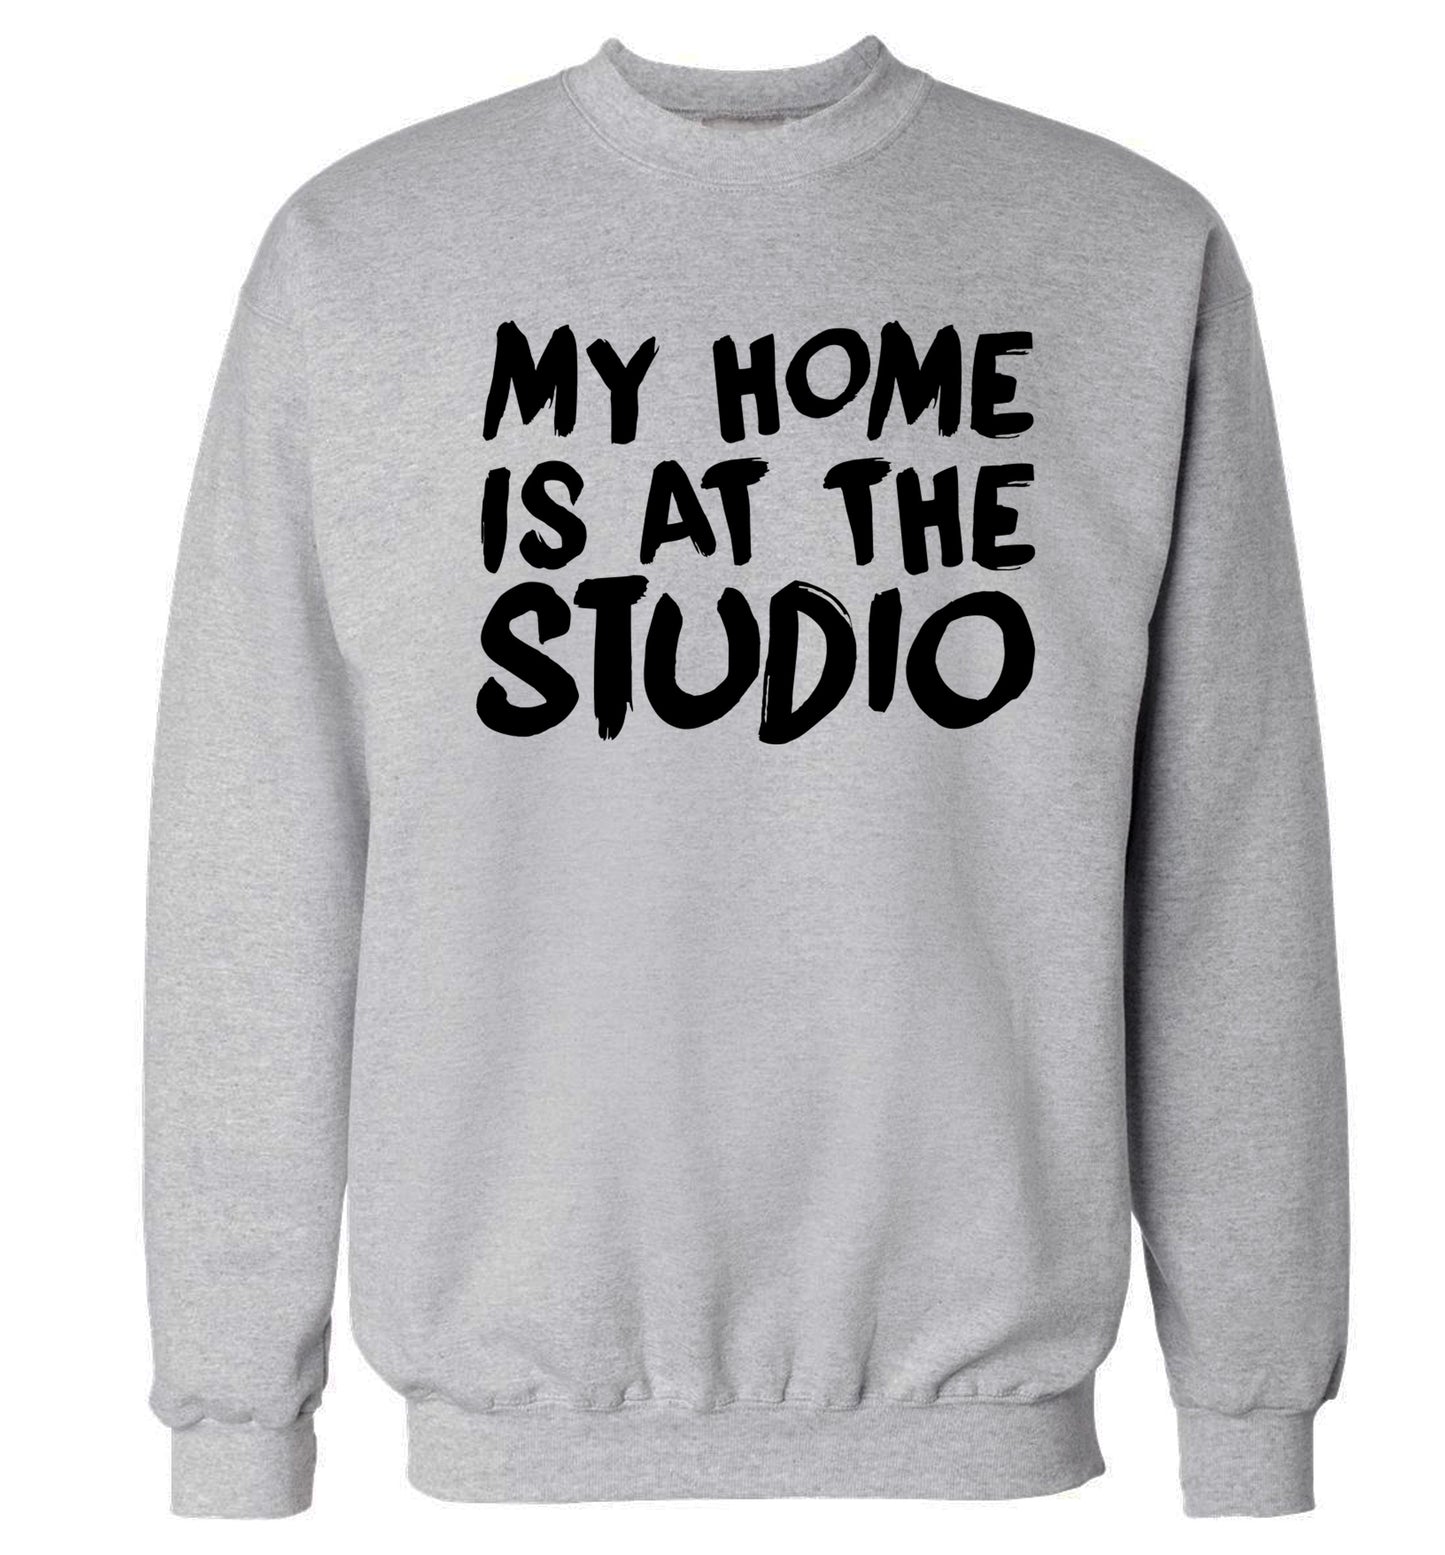 My home is at the studio Adult's unisex grey Sweater 2XL